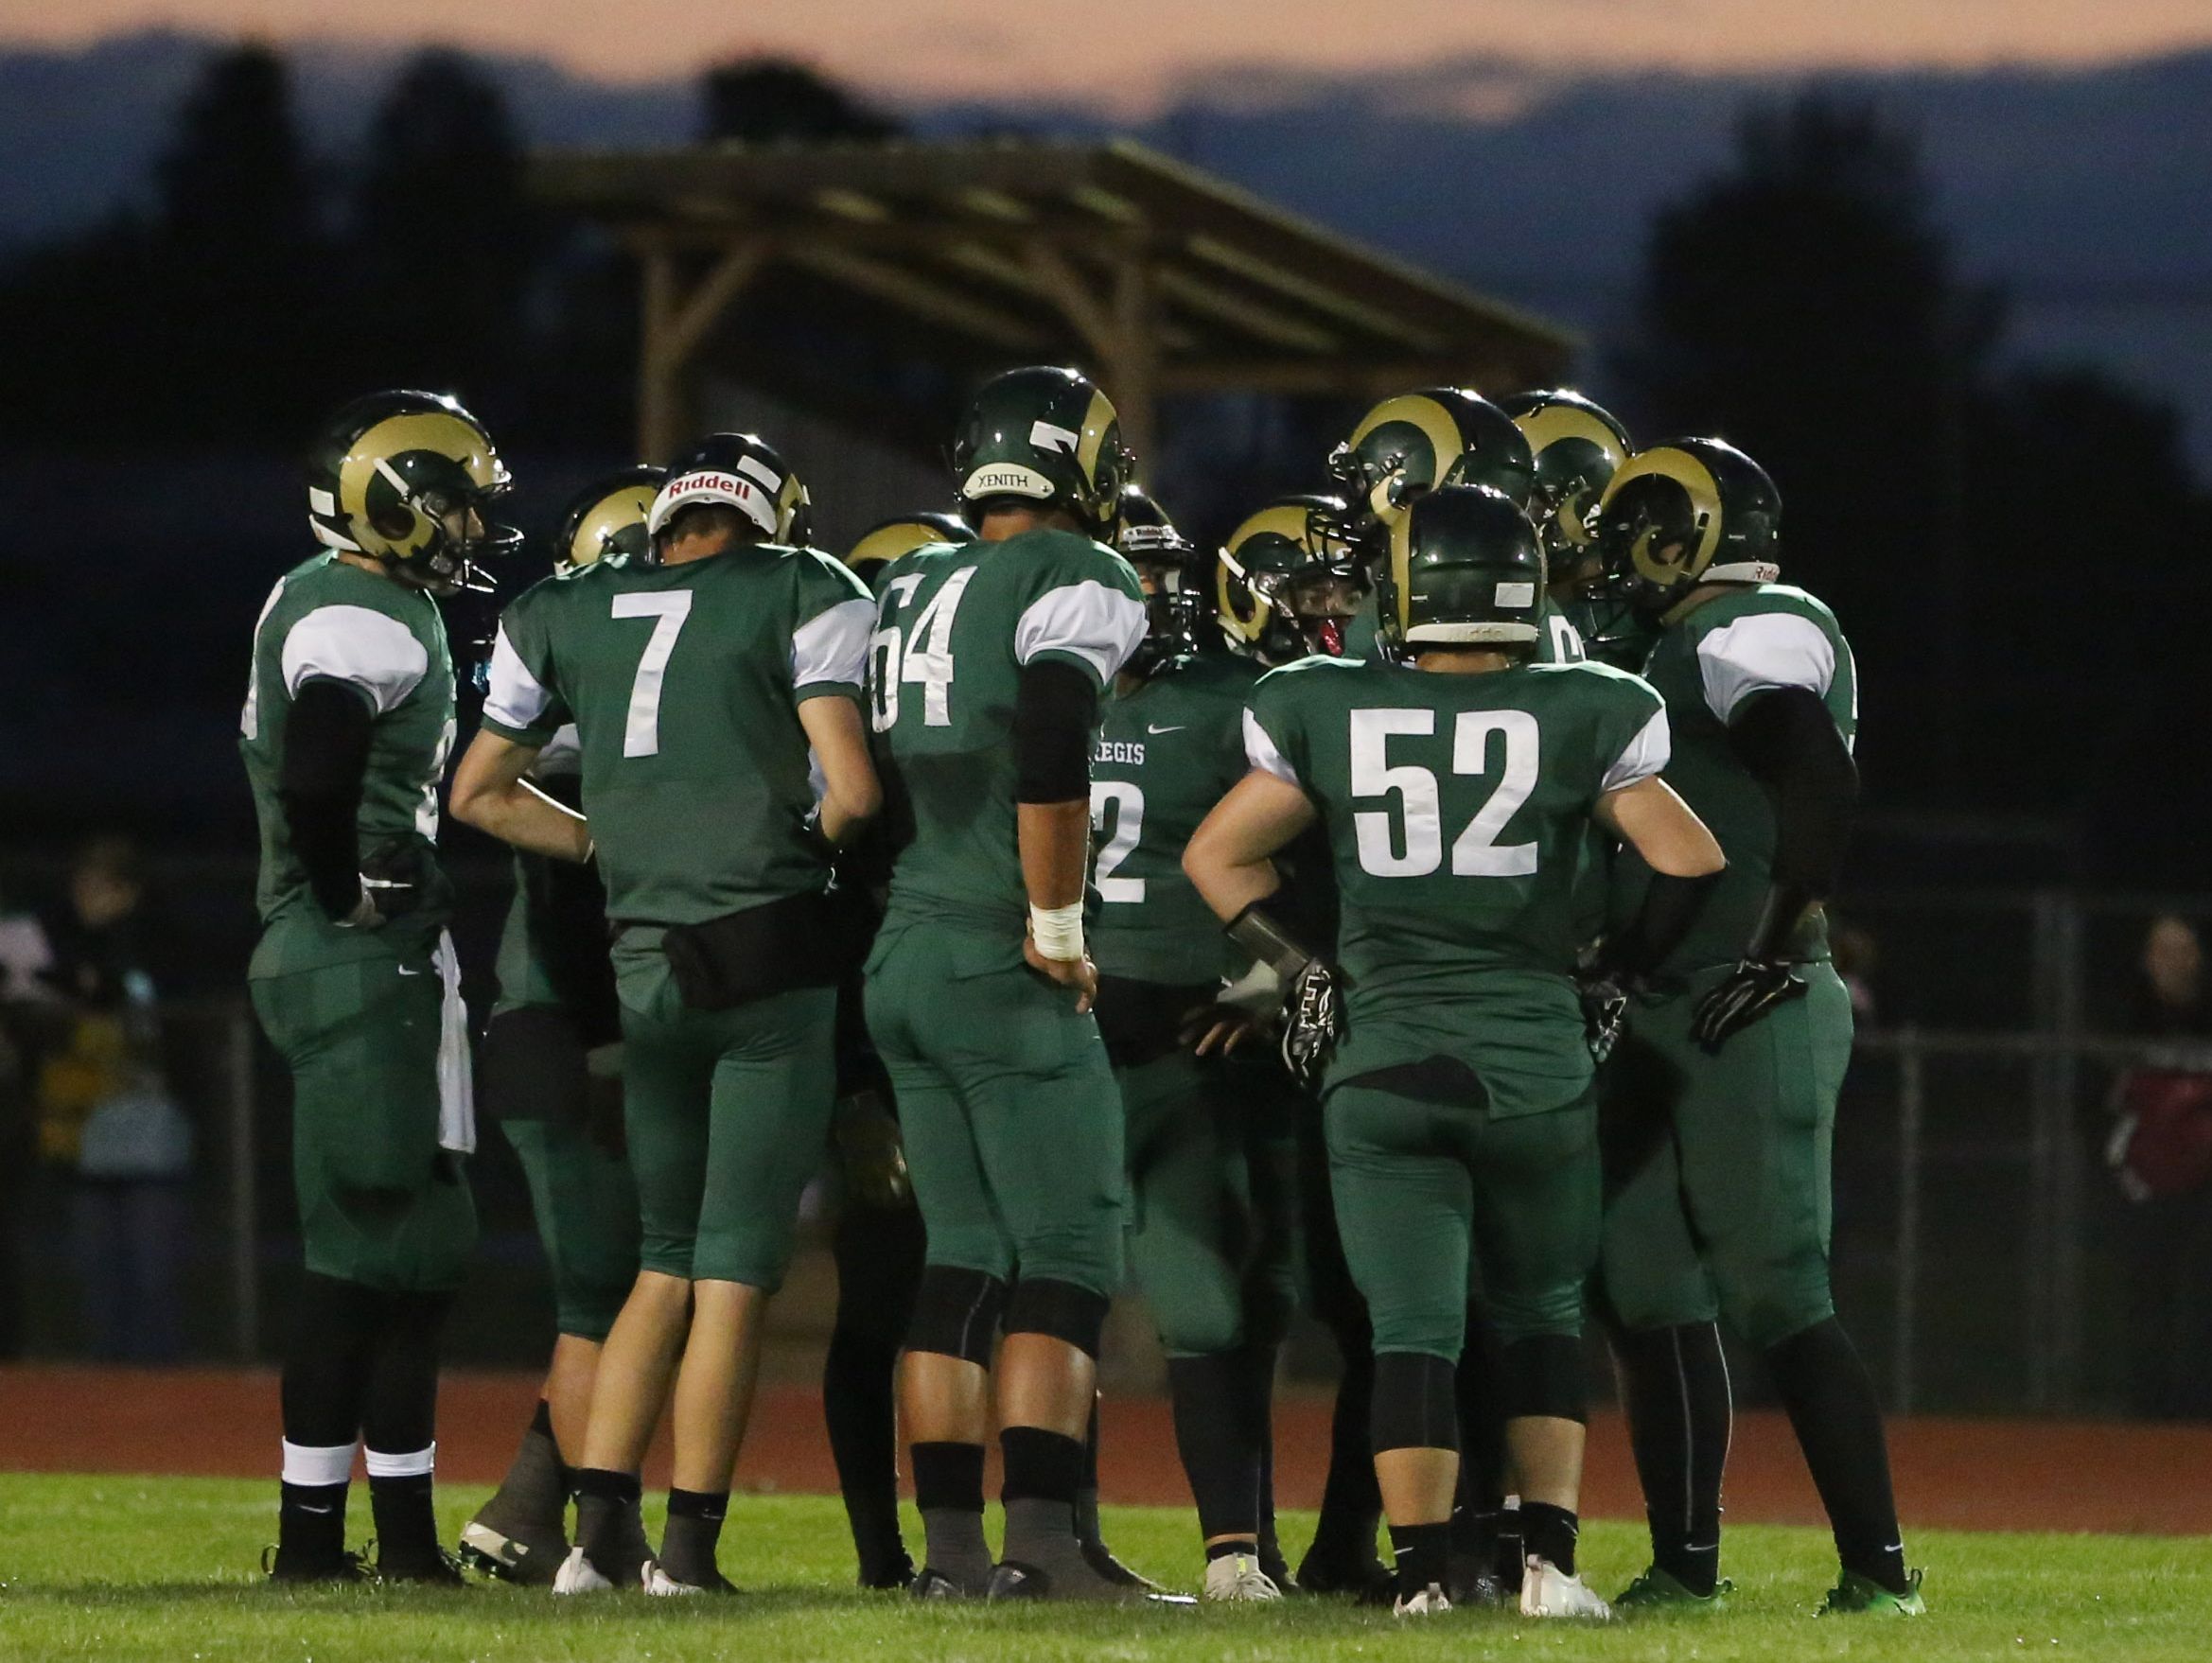 Regis defeats Kennedy 15-7 in a Tri-River Conference game on Friday, Sept. 30, 2016, in Stayton.